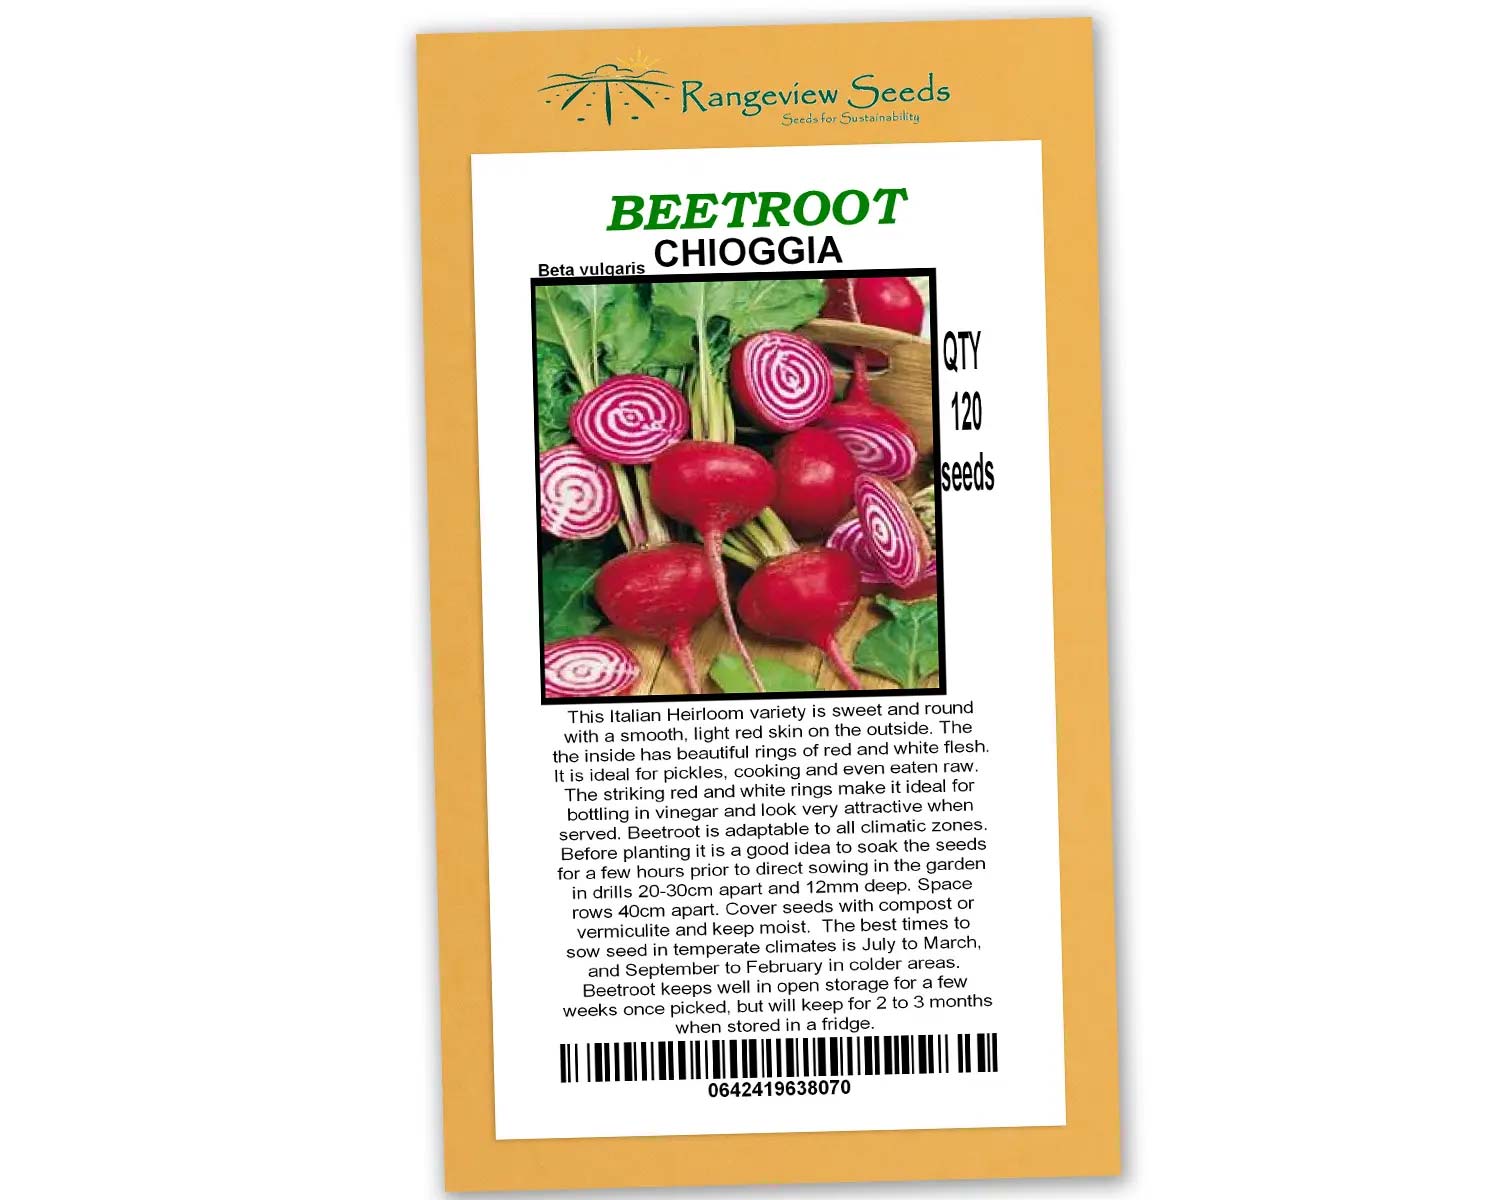 Beetroot Chioggia seeds from Rangeview of Tasmania